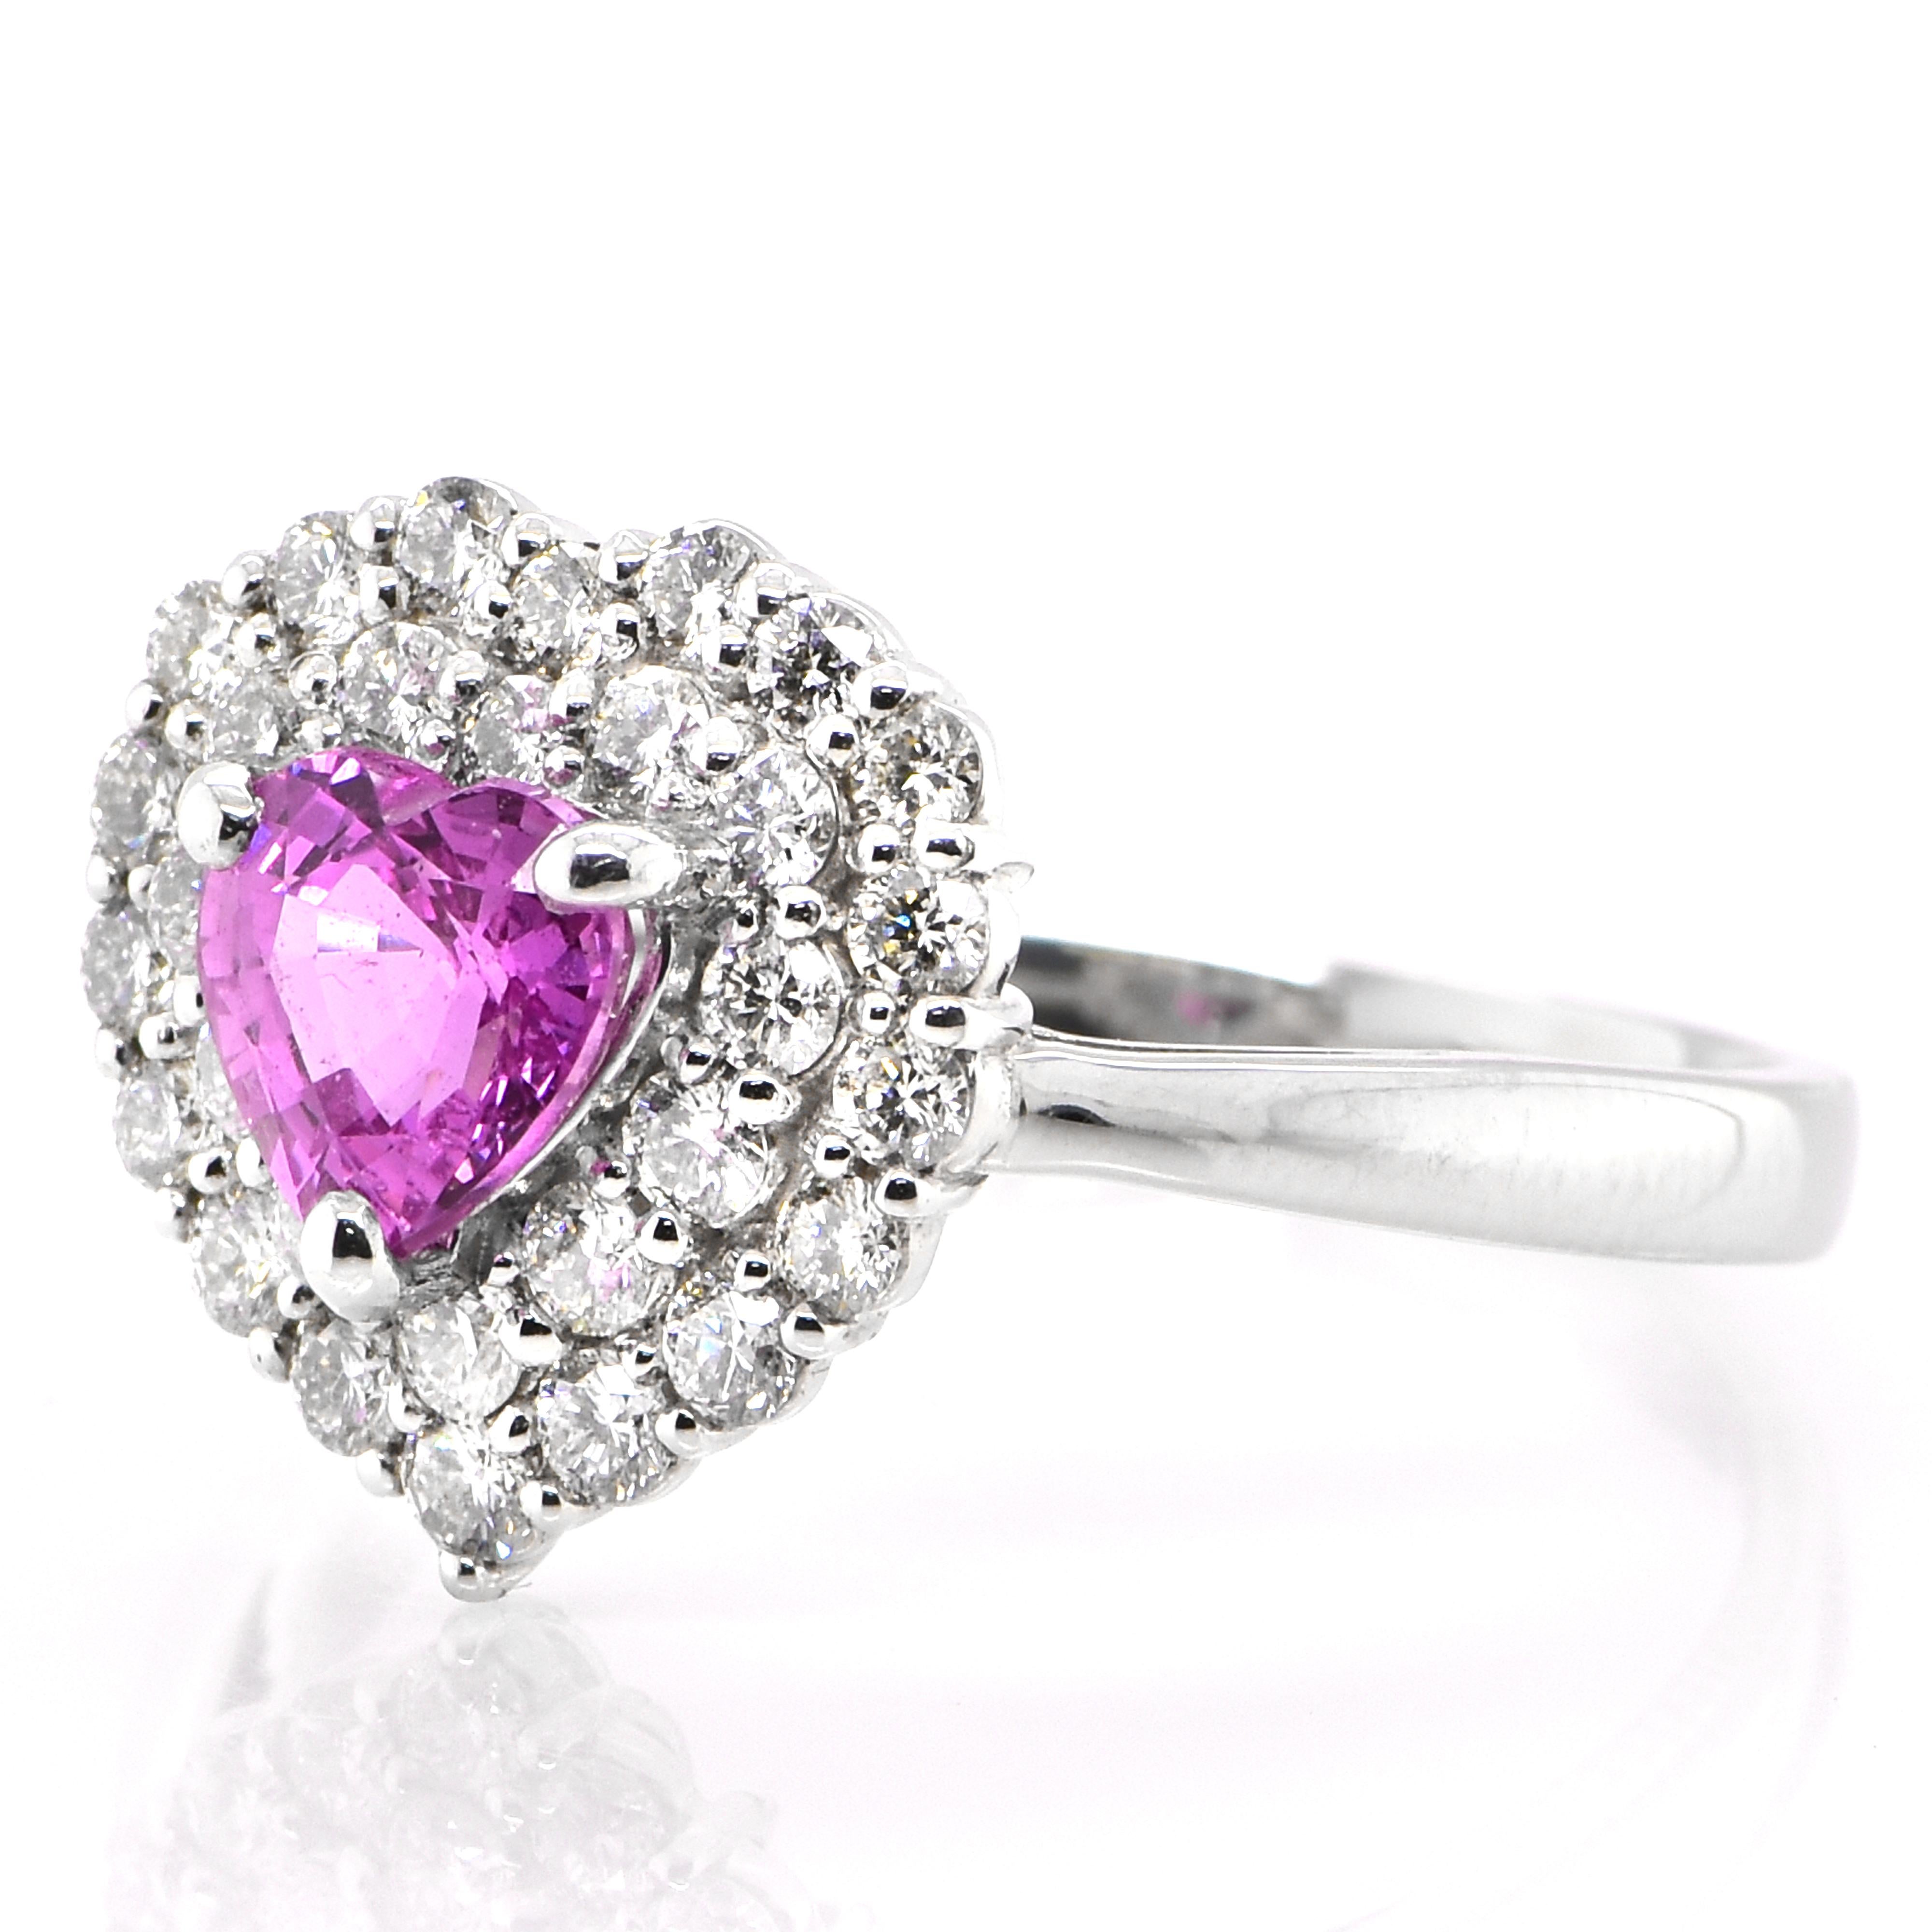 A beautiful ring featuring 1.06 Carat Natural Pink Sapphire and 0.65 Carats Diamond Accents set in Platinum. Sapphires have extraordinary durability - they excel in hardness as well as toughness and durability making them very popular in jewelry.